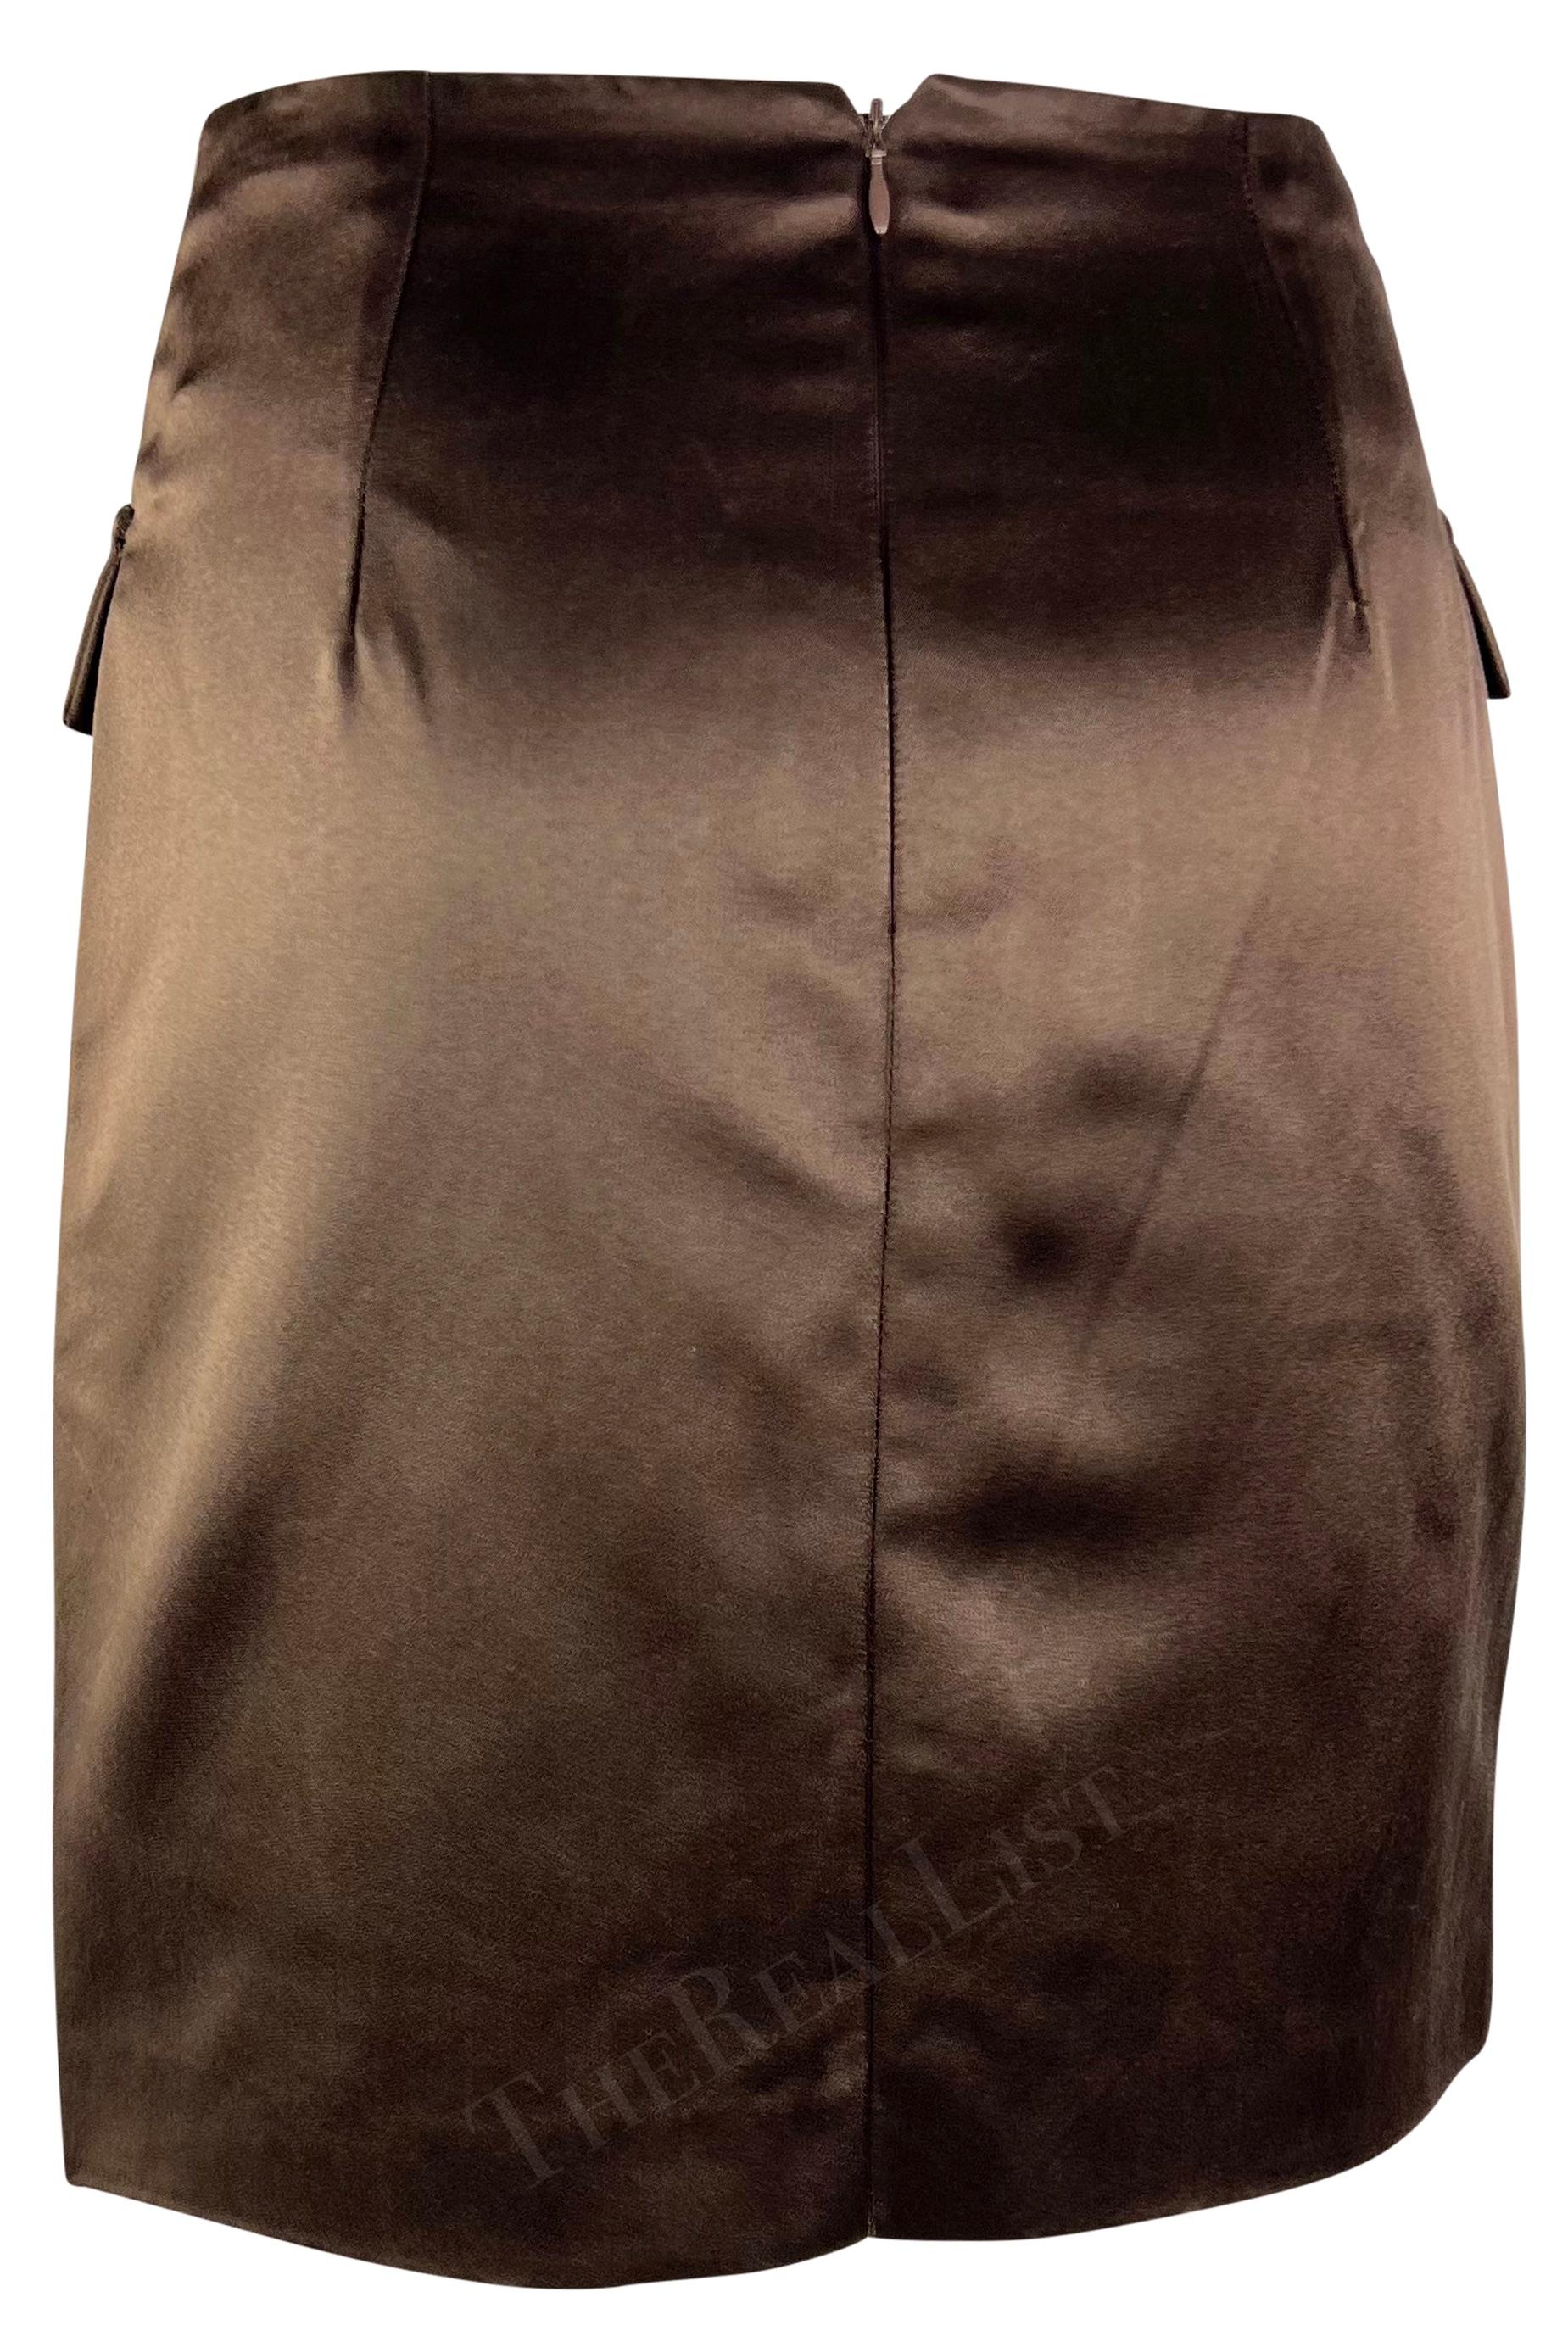 F/W 1996 Gianni Versace Couture Rhinstone Medusa Brown Silk Satin Mini Skirt In Good Condition For Sale In West Hollywood, CA